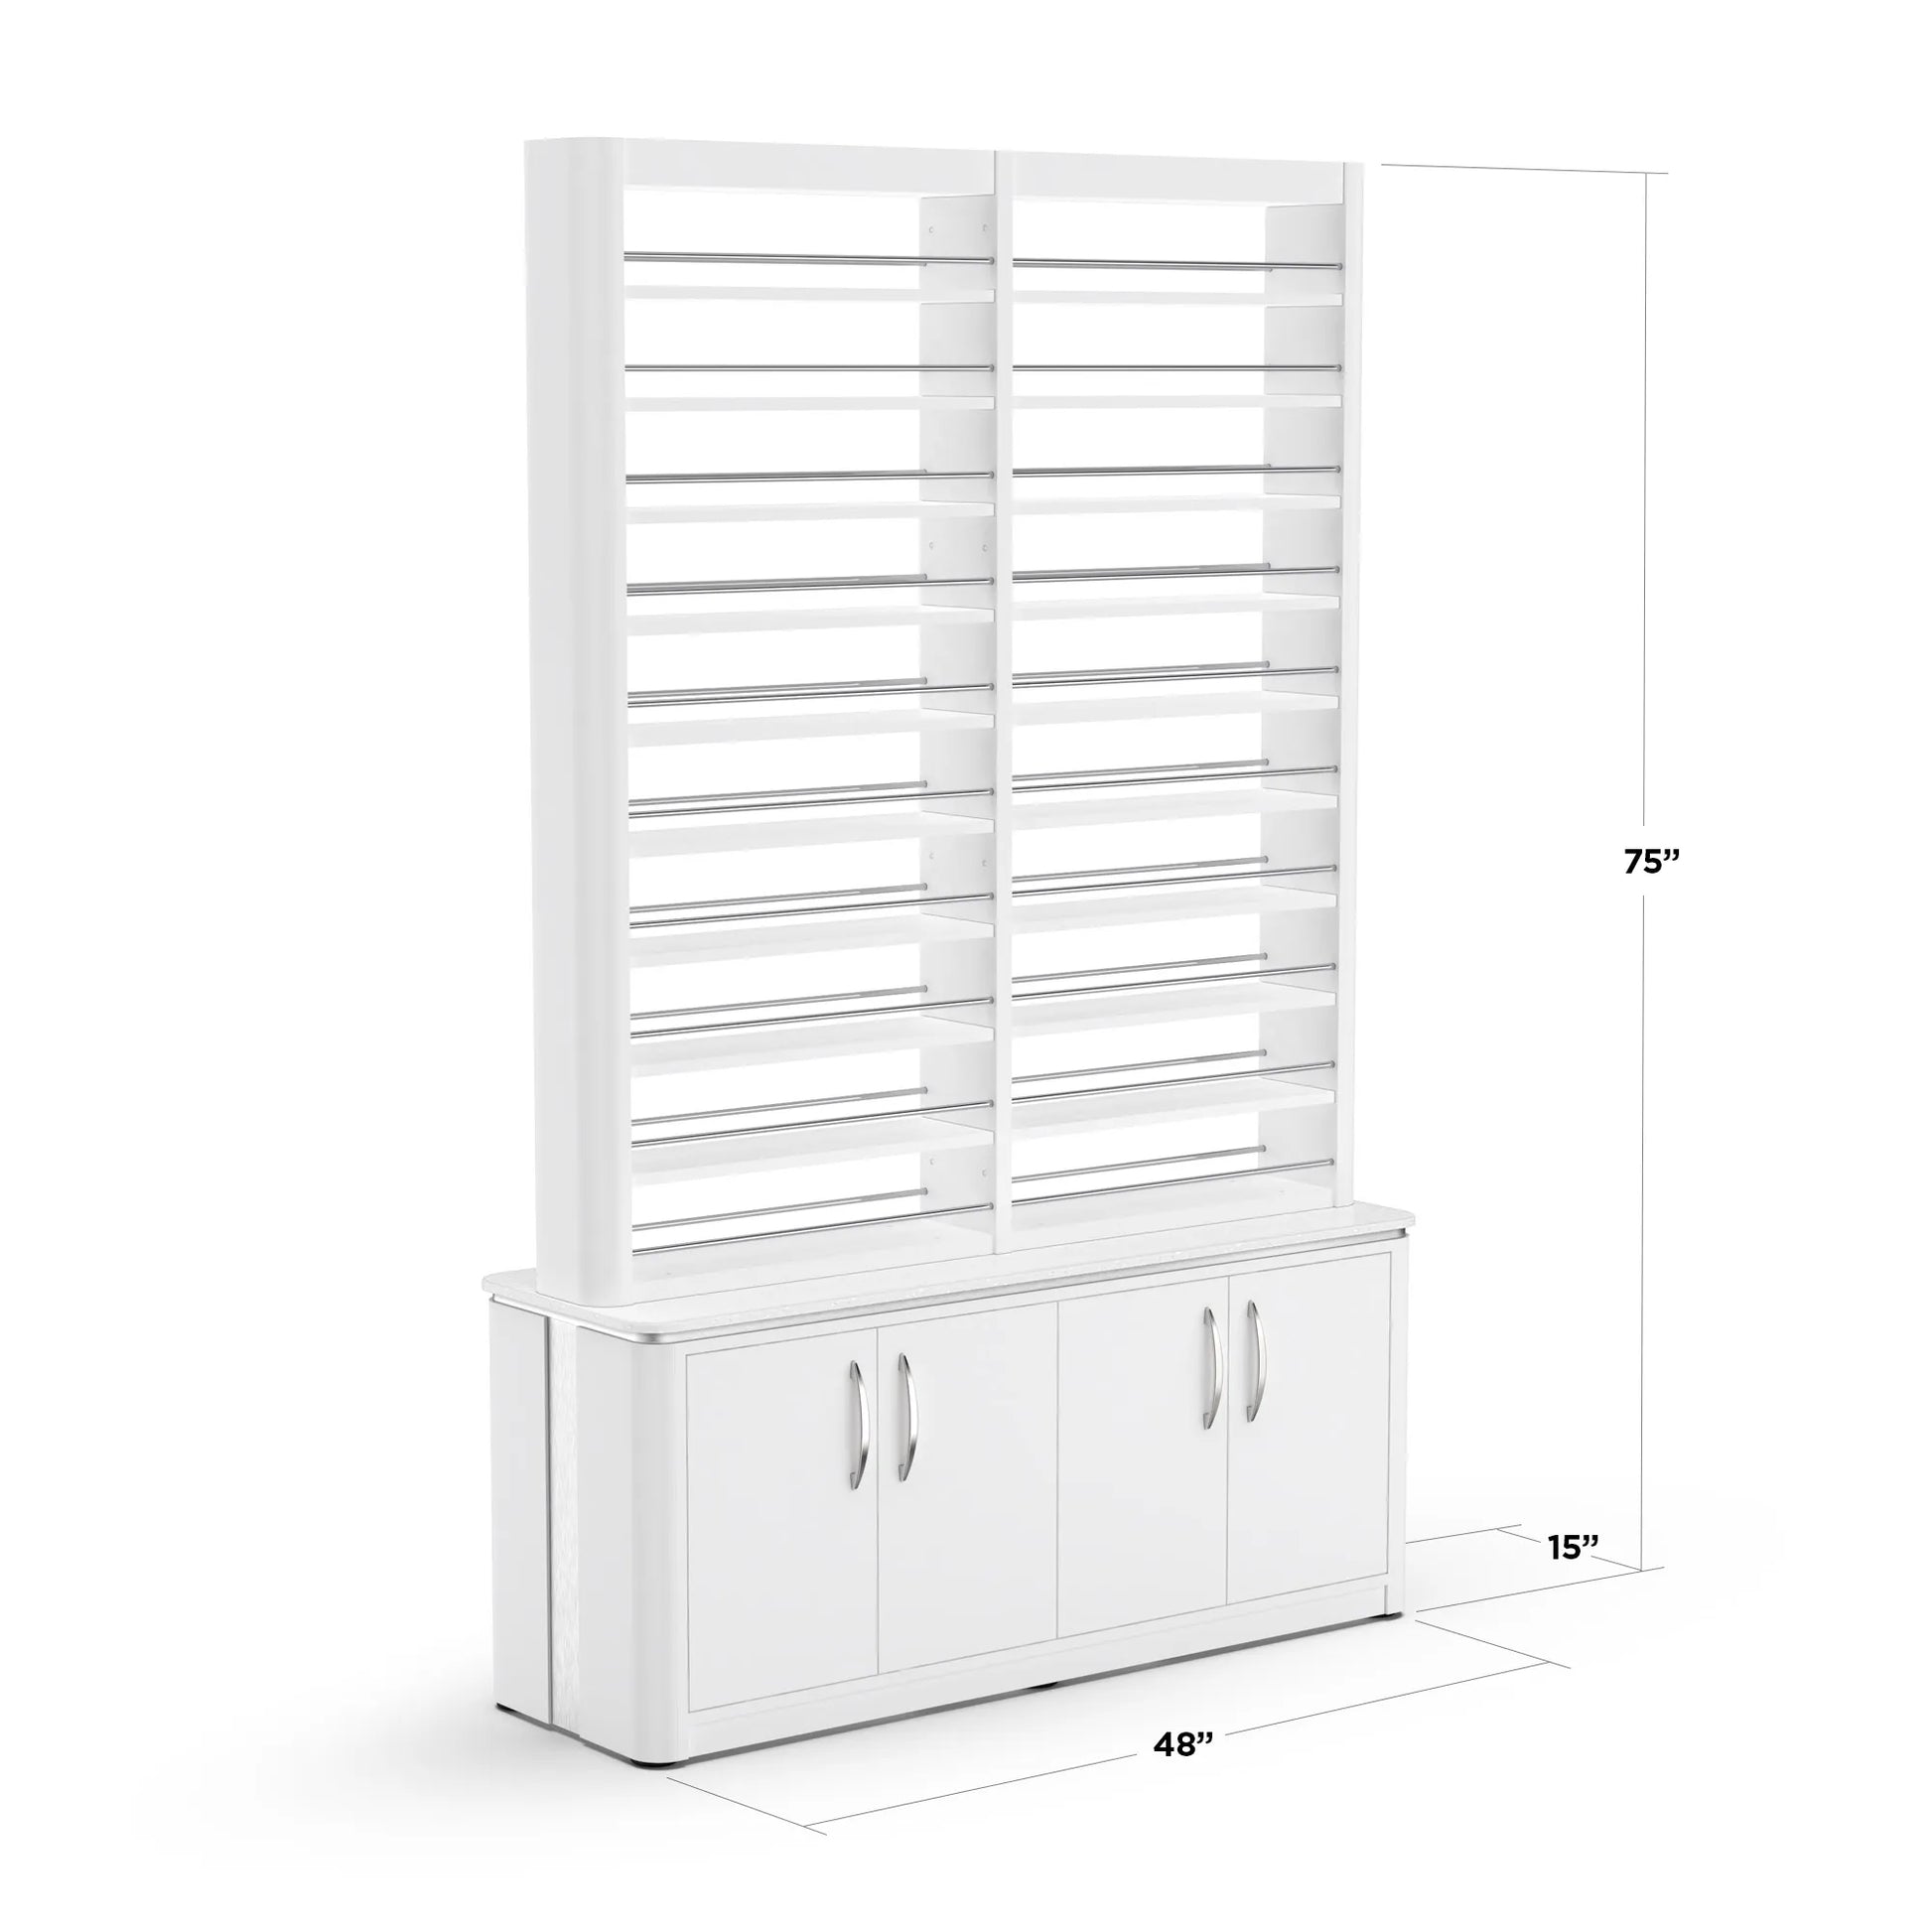 White Lexor VM840 Double Nail Polish Rack with Storage, with Dimensions